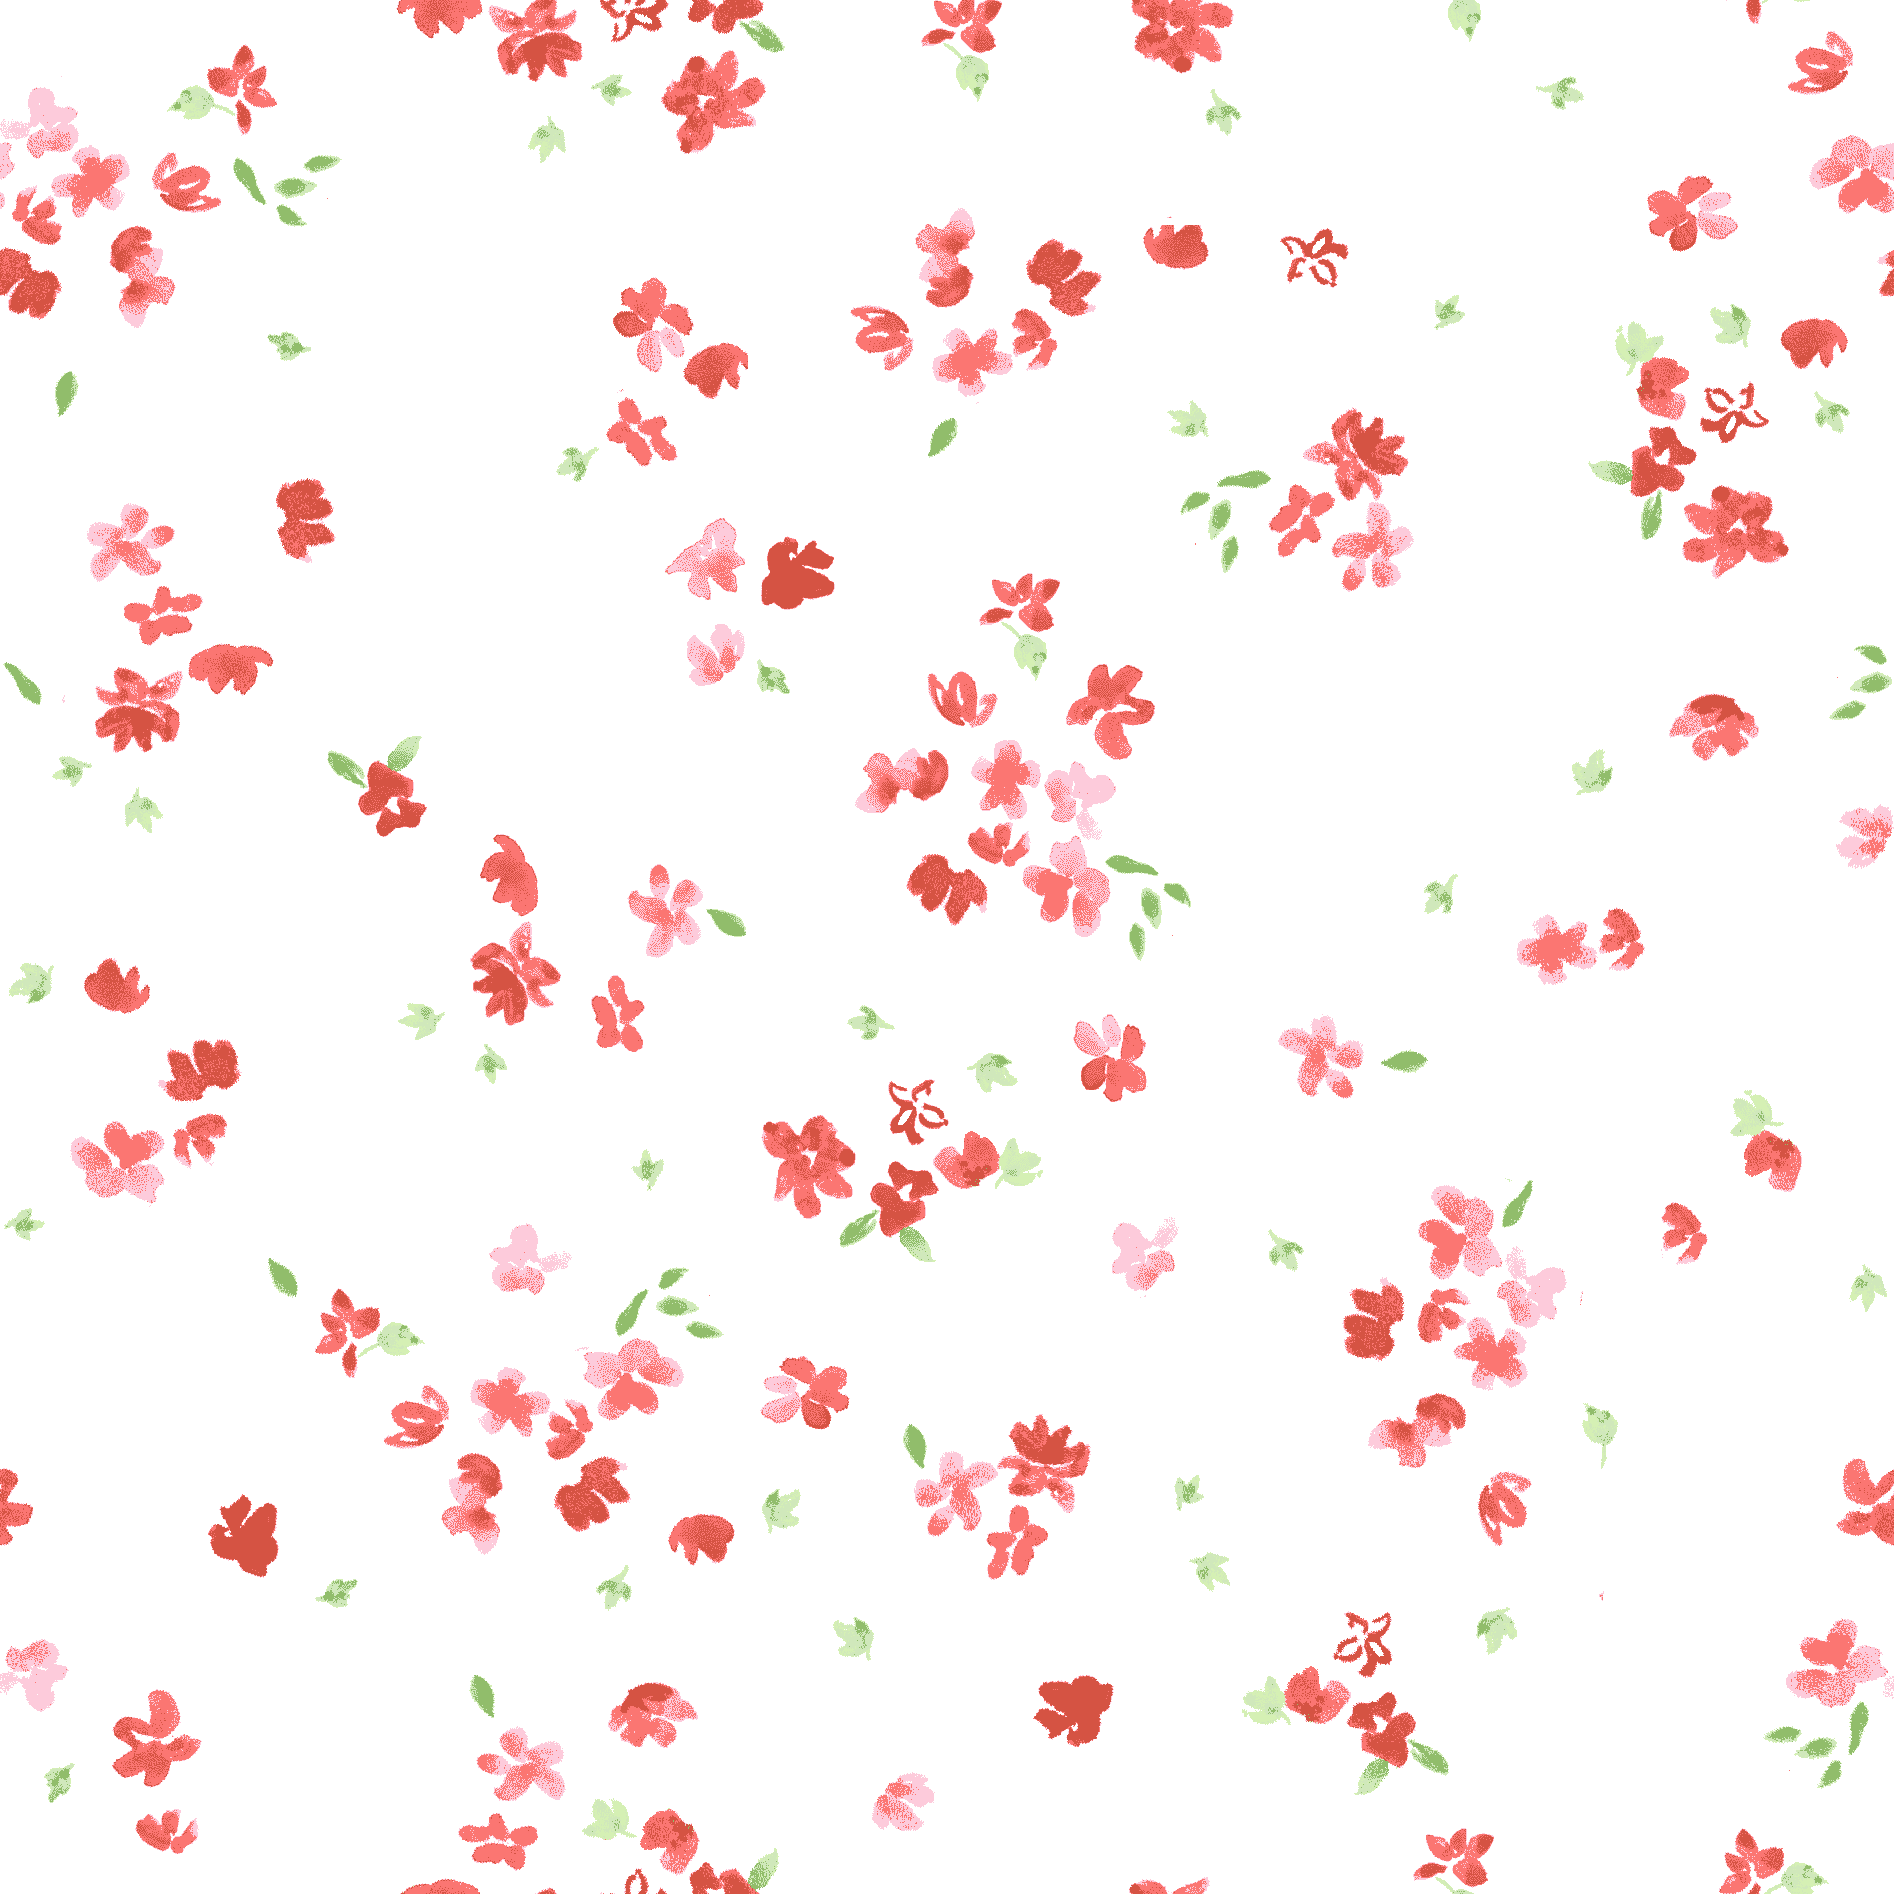 Stitch & Sparkle Fabrics, Watercolor Floral, Small Watercolor Flowers  Cotton Fabrics,  Quilt, Crafts, Sewing, Cut By The Yard